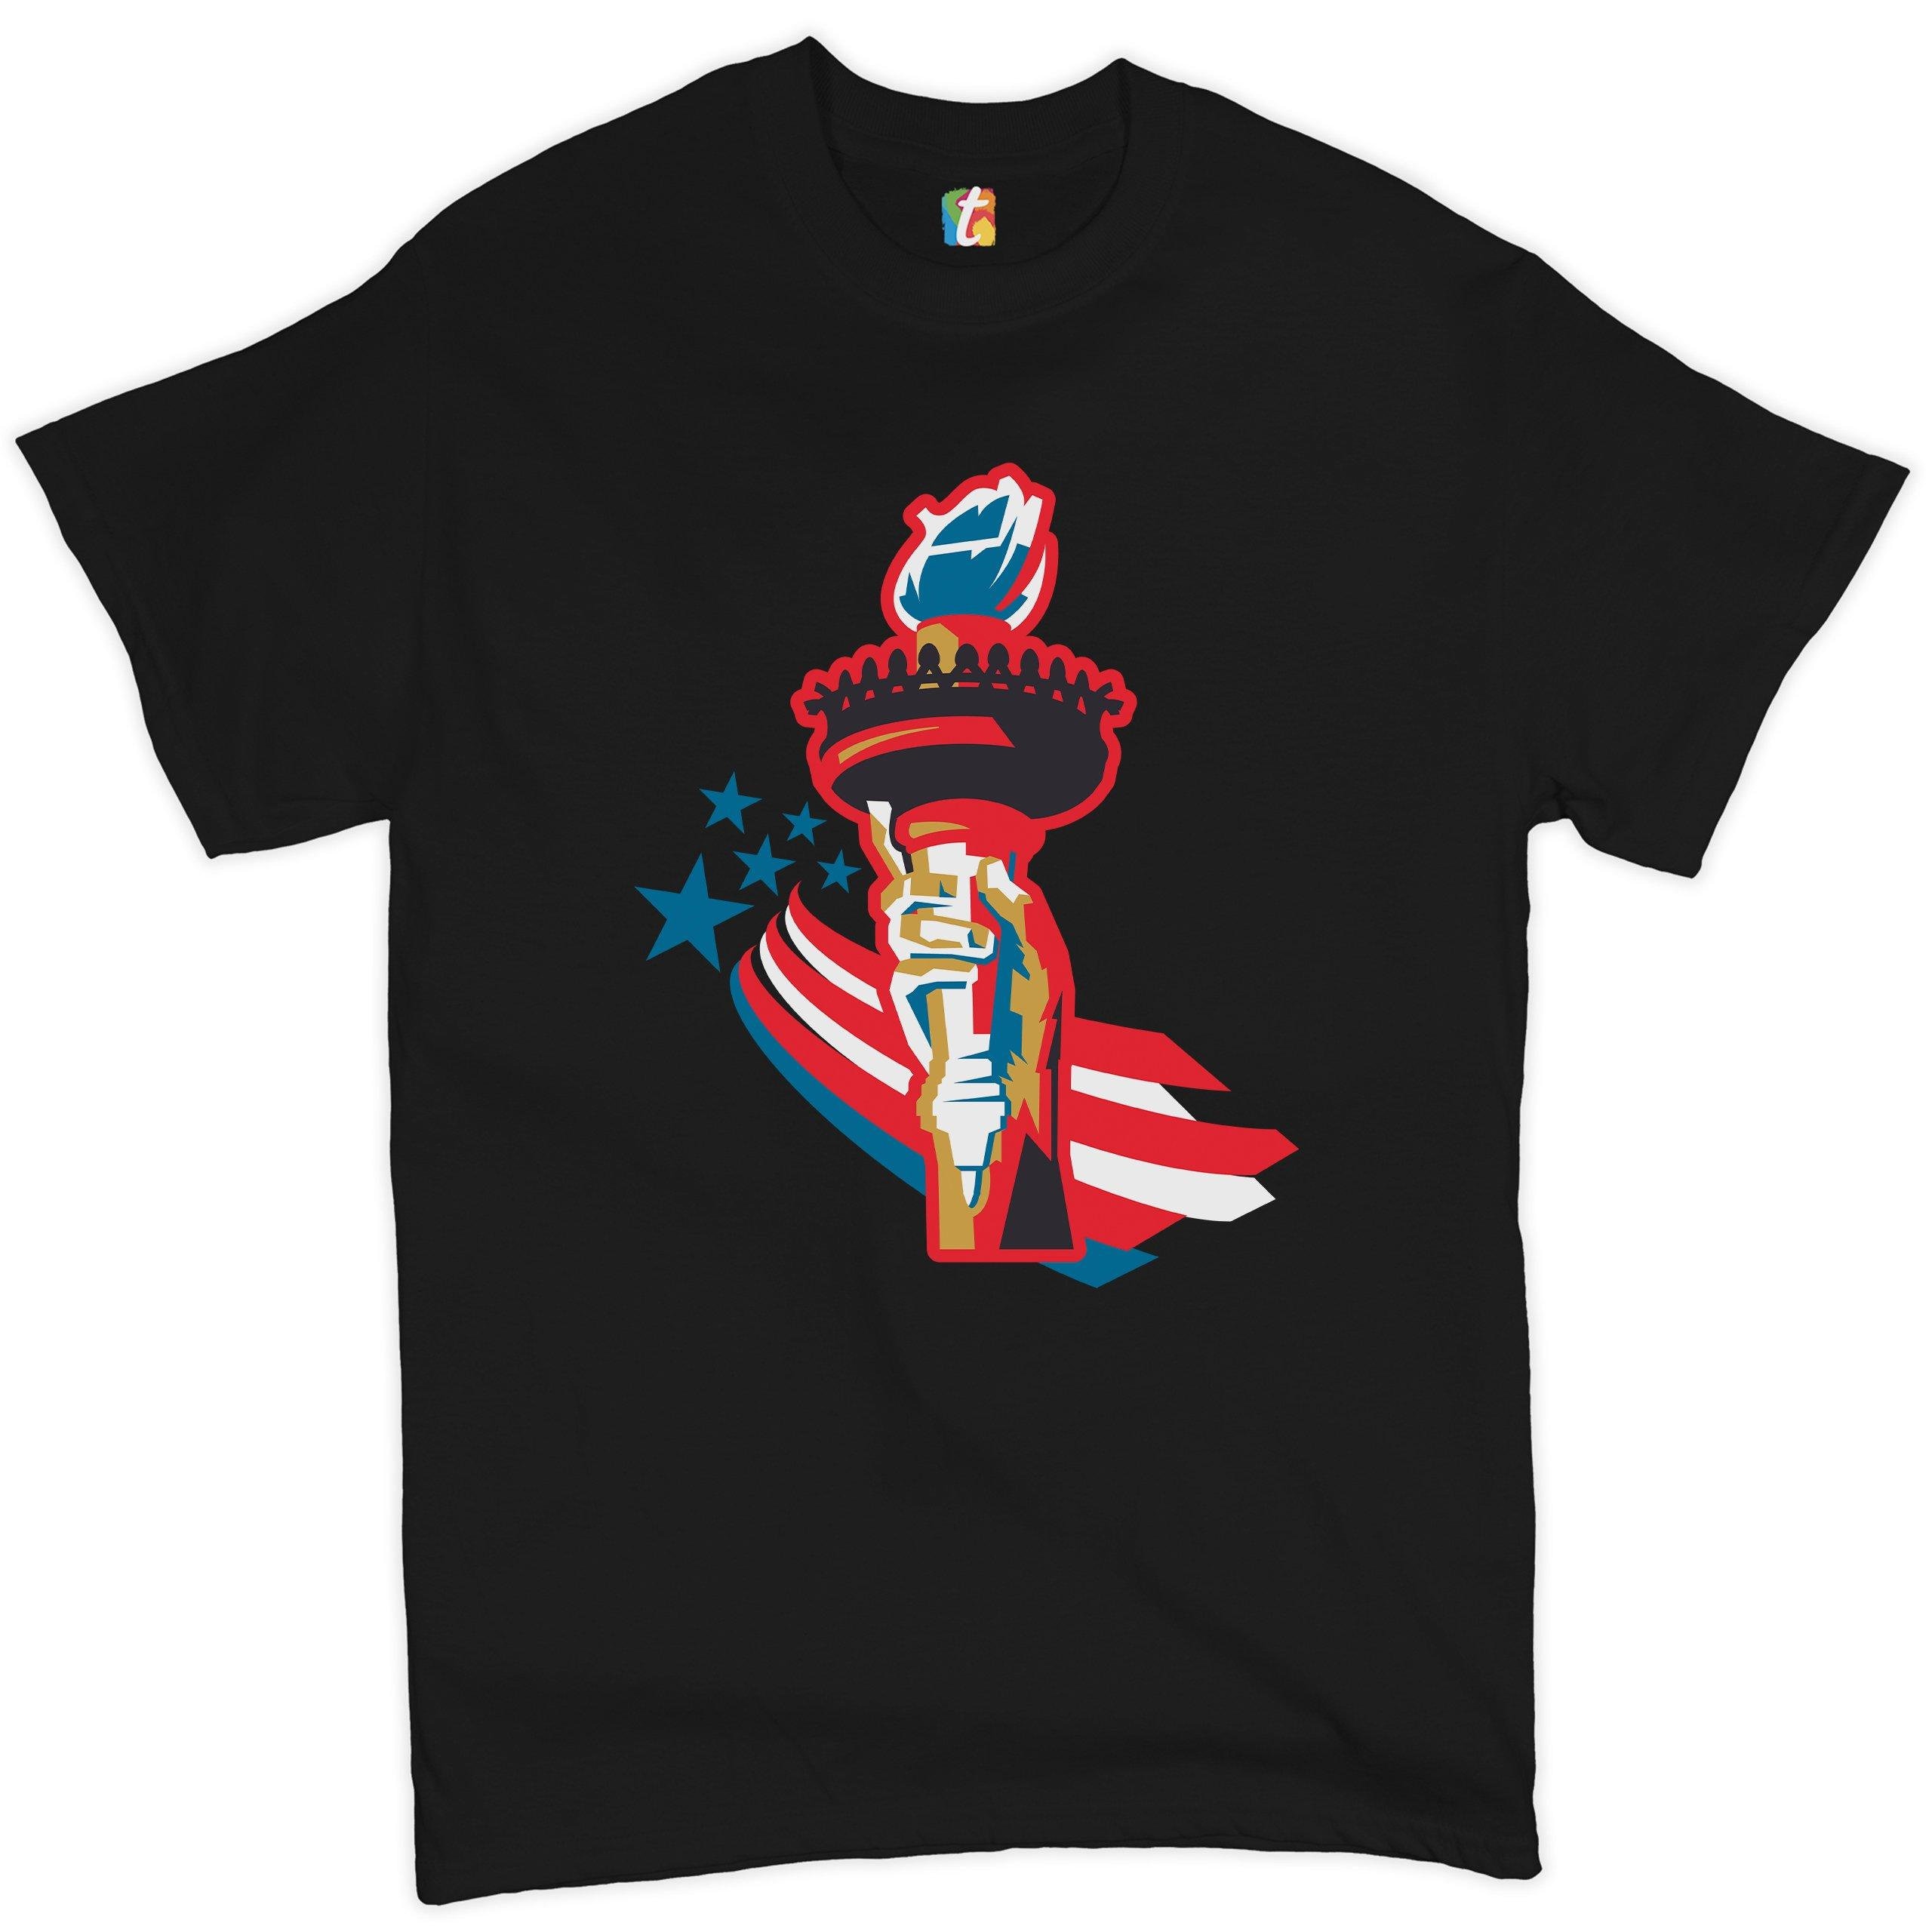 Statue of Liberty Torch V-Neck T-shirt 4th of July Stars and Stripes Independence Day Freedom Lady Liberty NYC Manhattan Tee